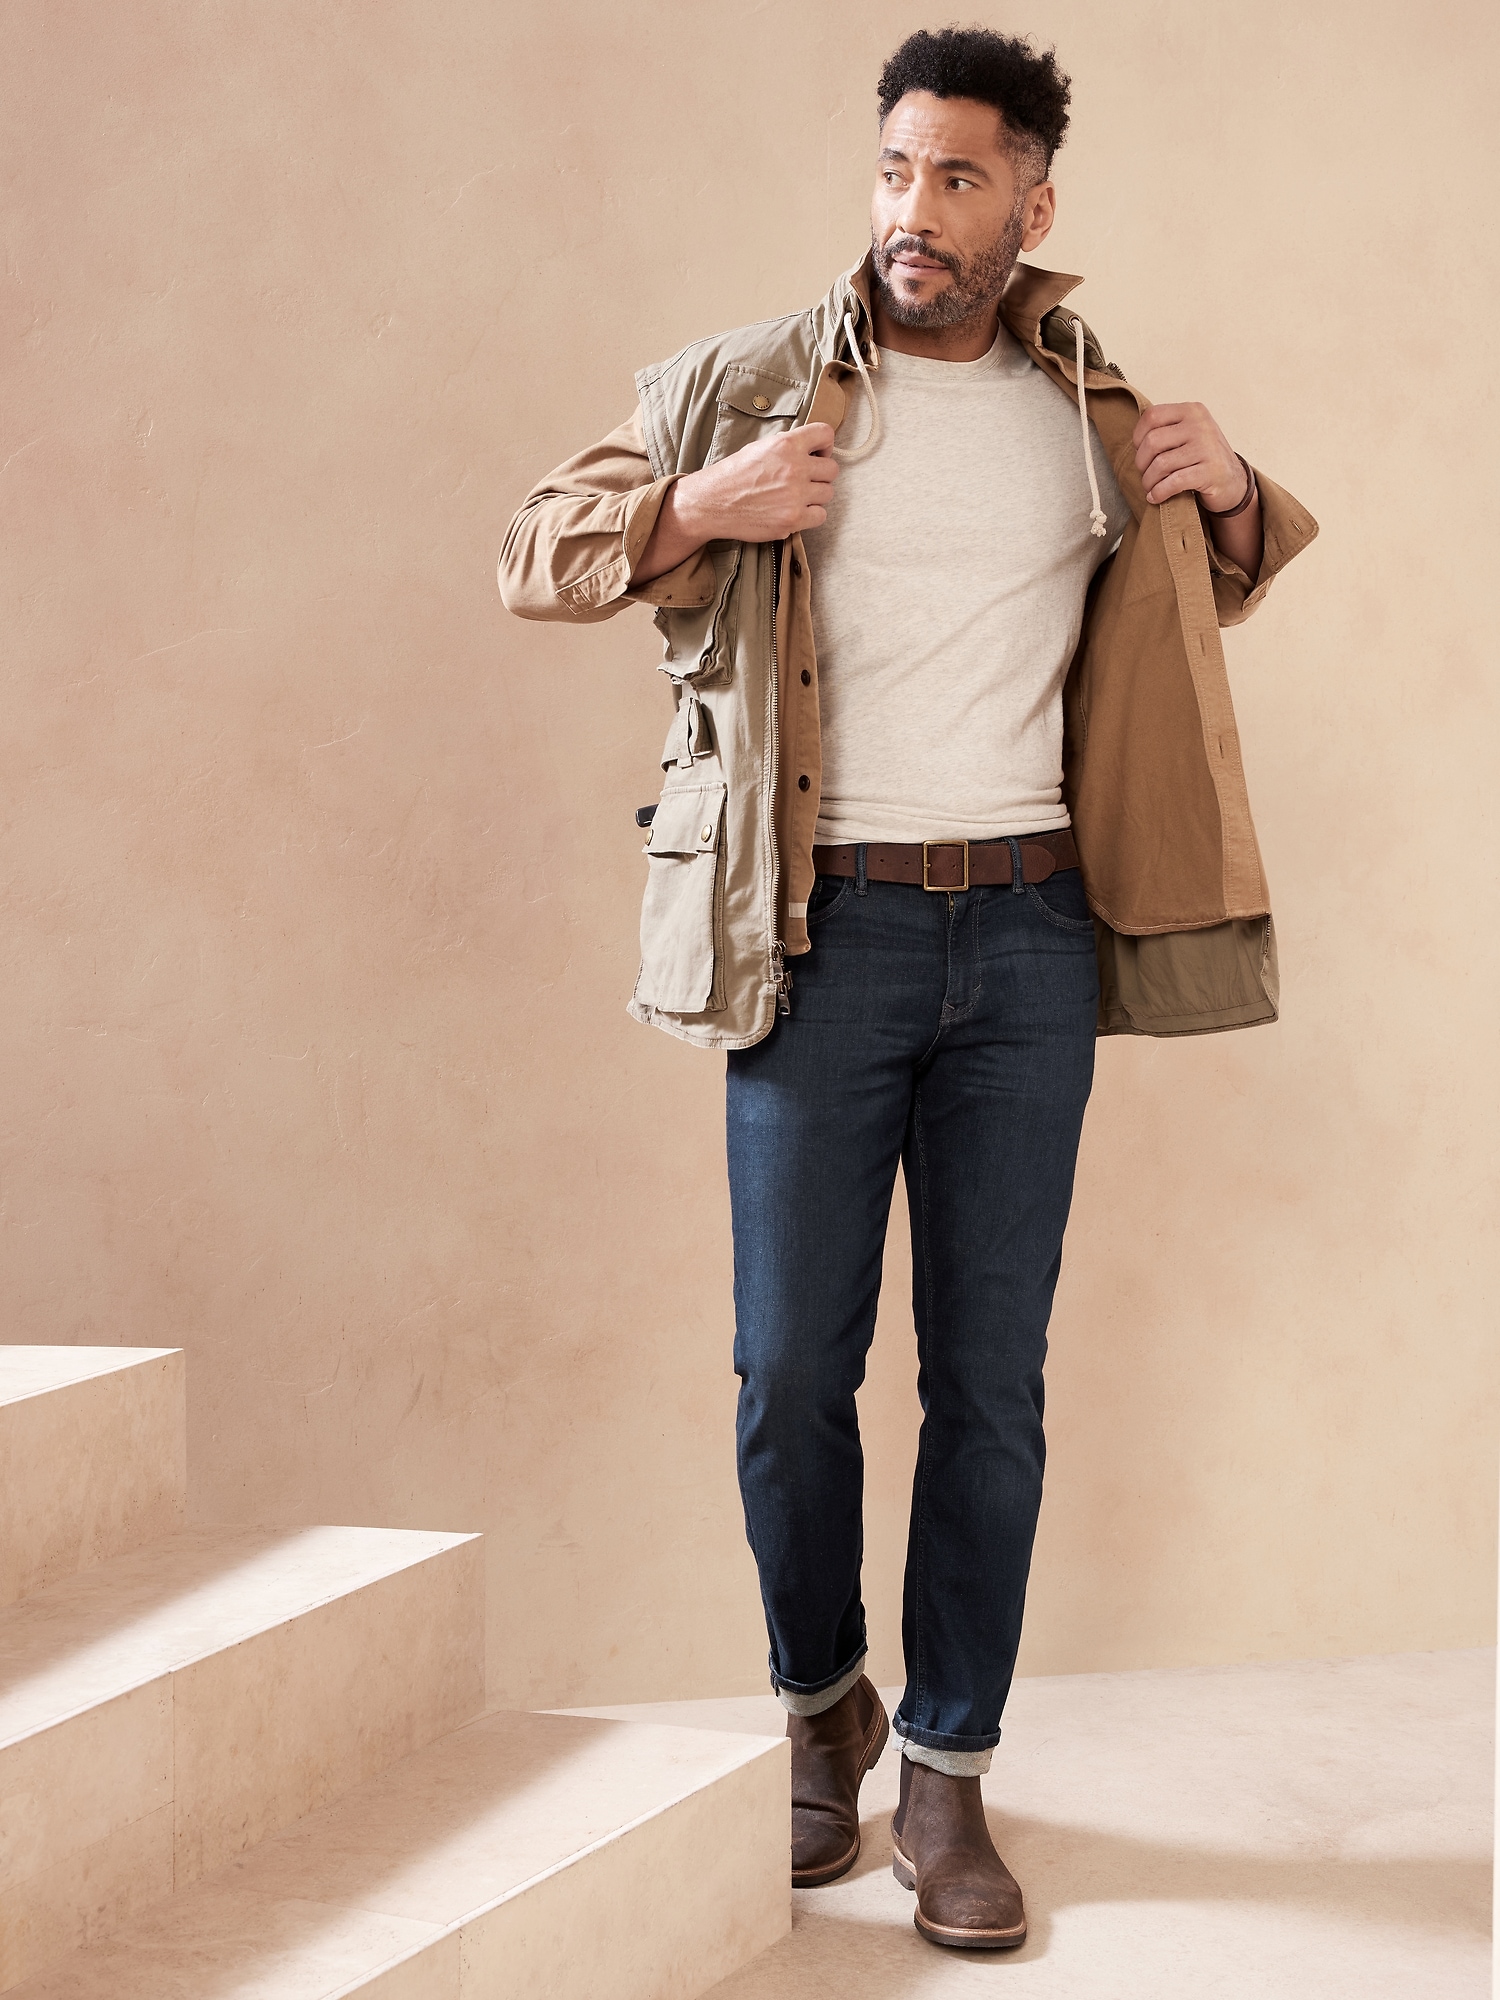 Banana Republic - Rapid Movement Chinos, they're Fall's best pants. Why?  Incredible stretch & recovery, stain & water resistance, tons of styles &  colors. What more do you need? http://brstyl.es/2xpOgvG #BRMens |